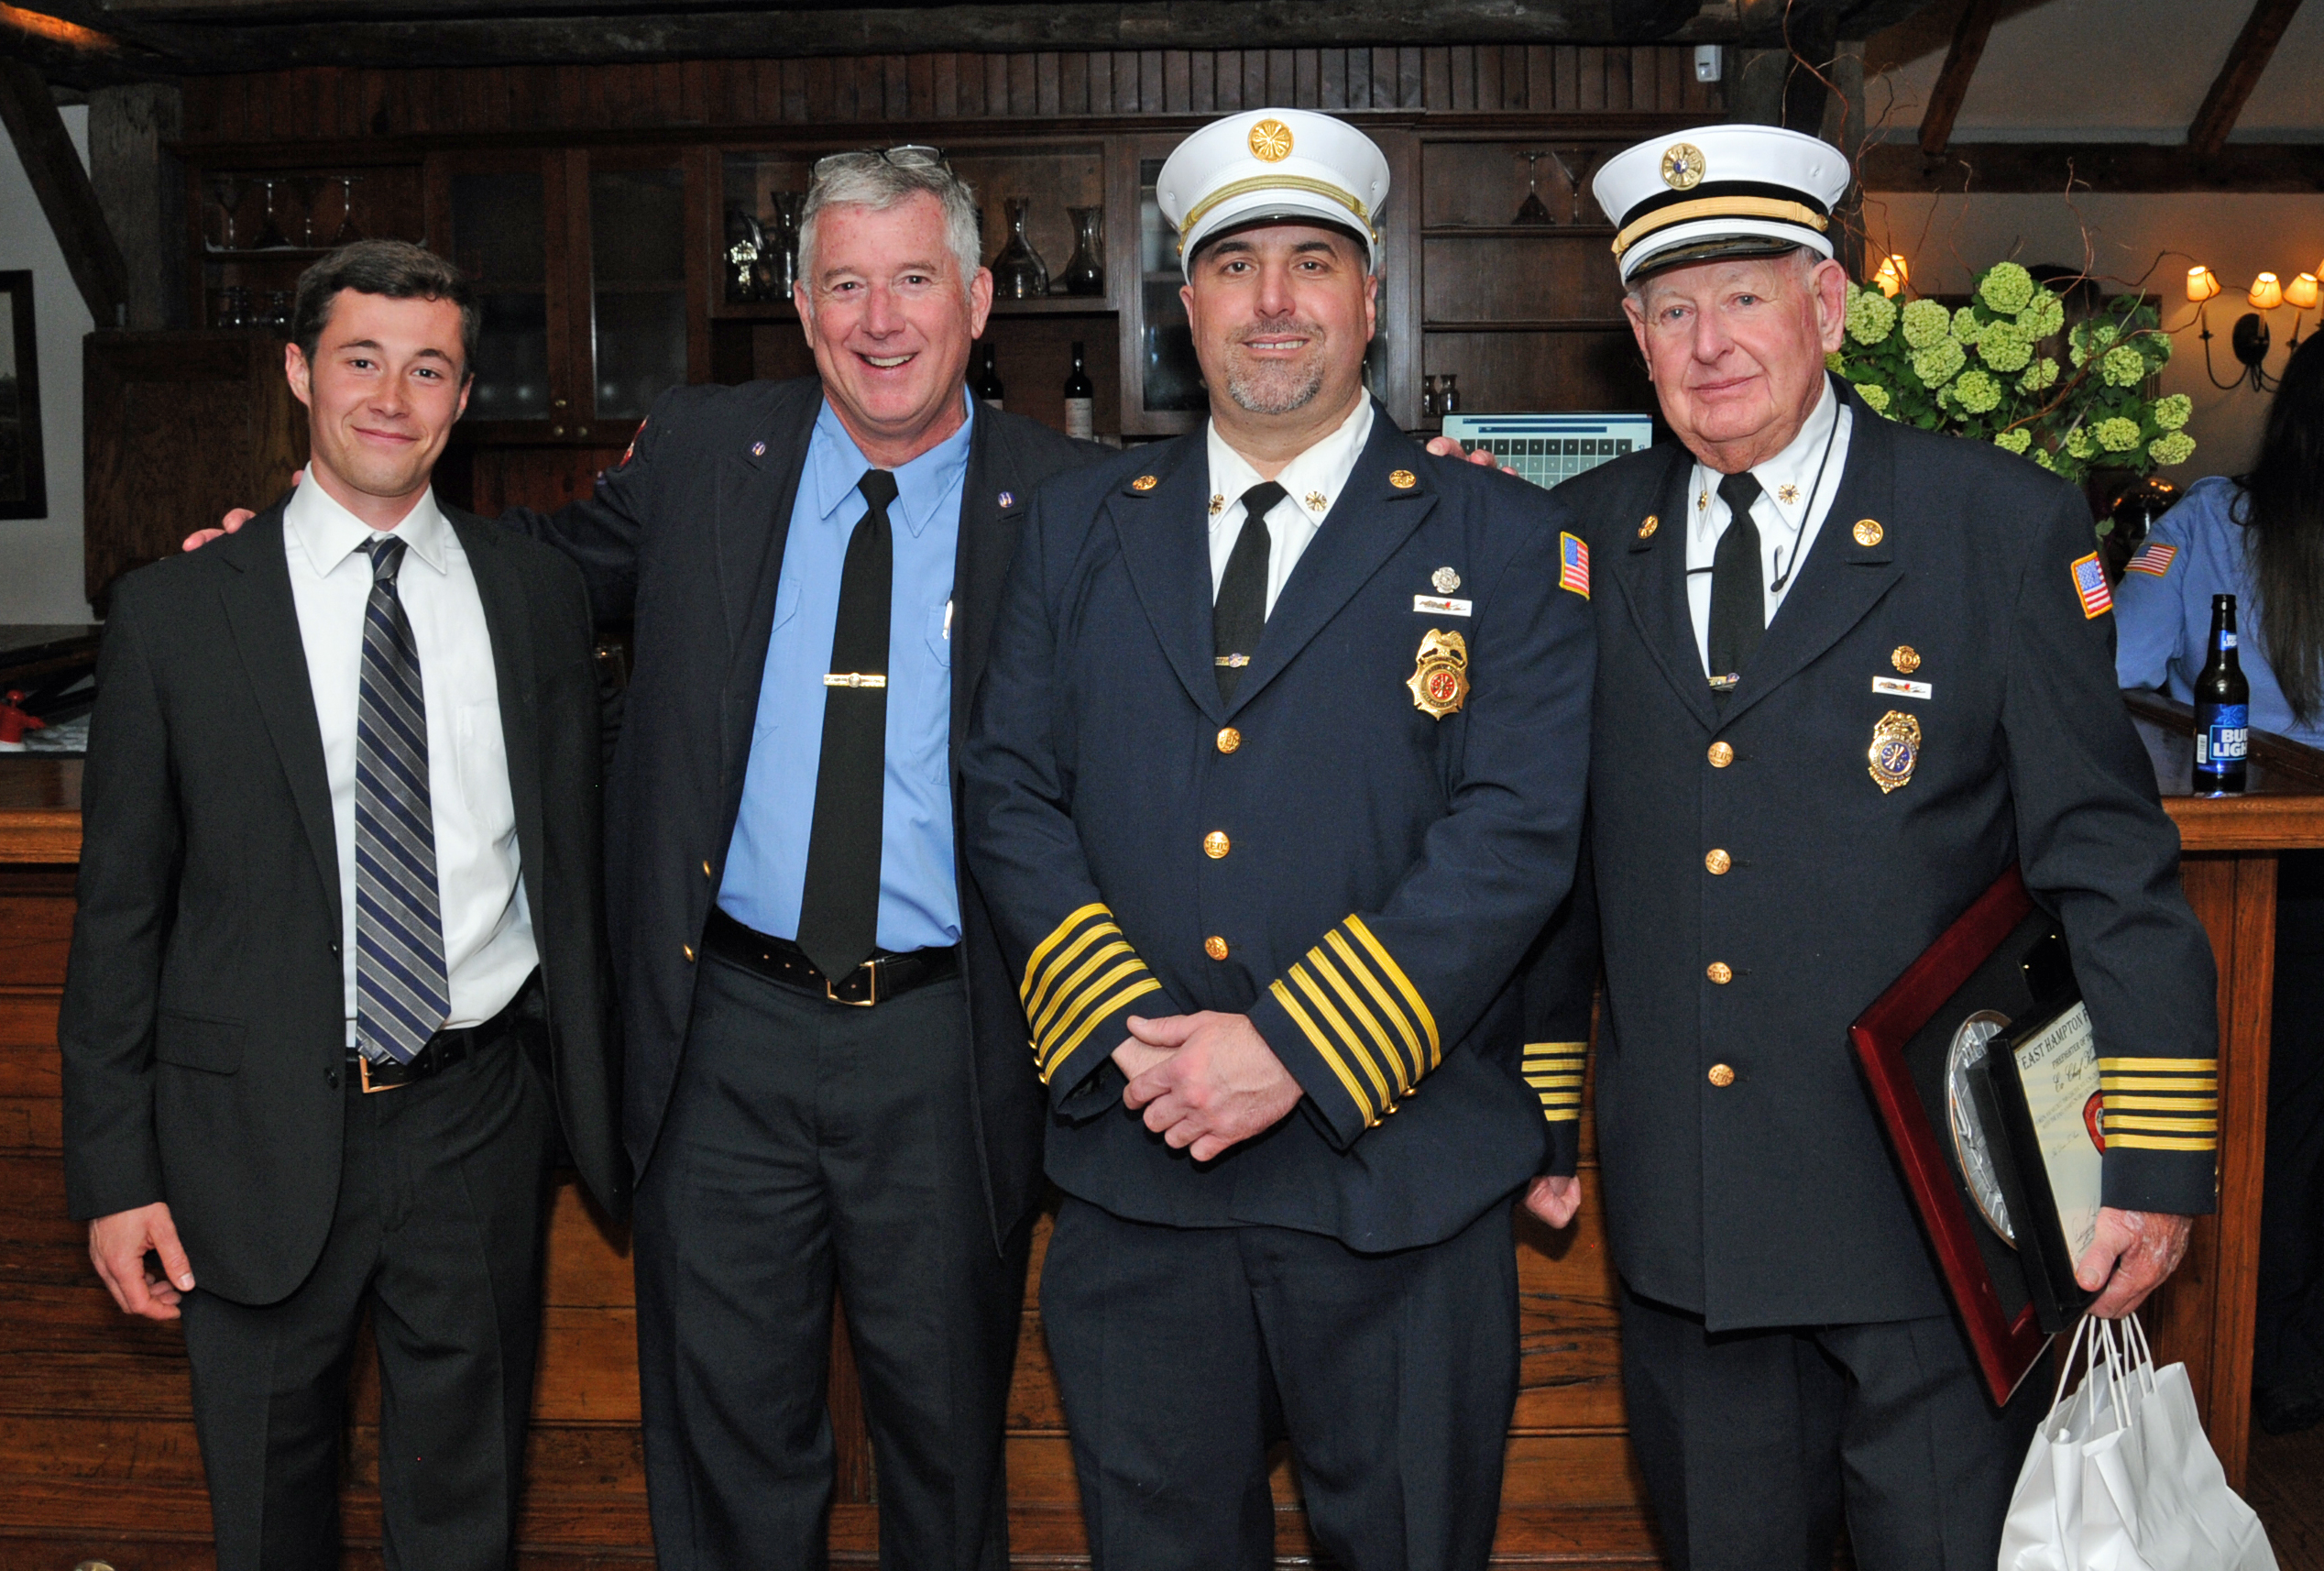 Austin Brown, EHFD Captain 2022 Officer of the Year Greg Brown, EHFD Chief Duane Forrester, EHFD Ex-Chief 2022 Fireman of the Year Ken Brown at the East Hampton Fire Department Awards Dinner